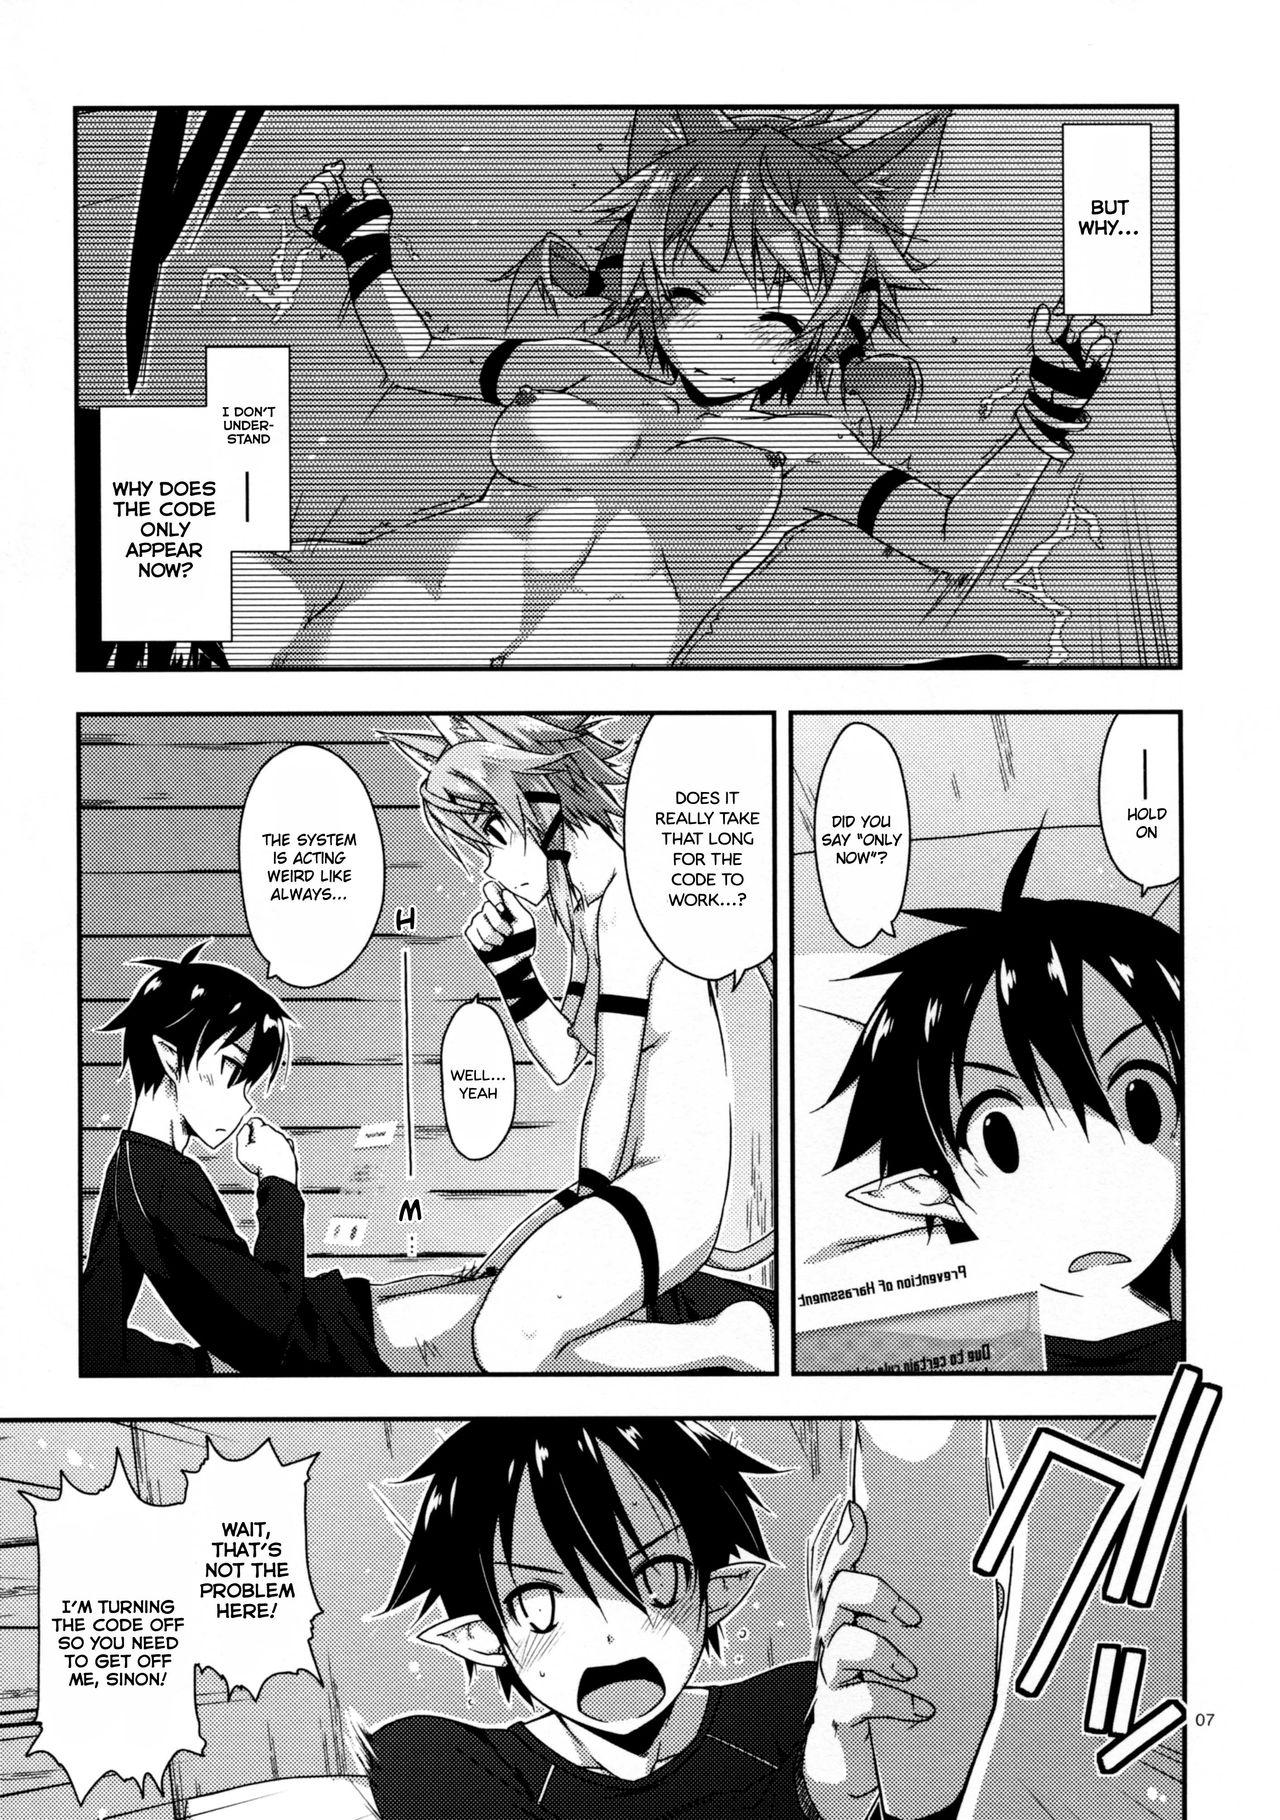 Amature Sex Tapes Case closed. - Sword art online Real - Page 7